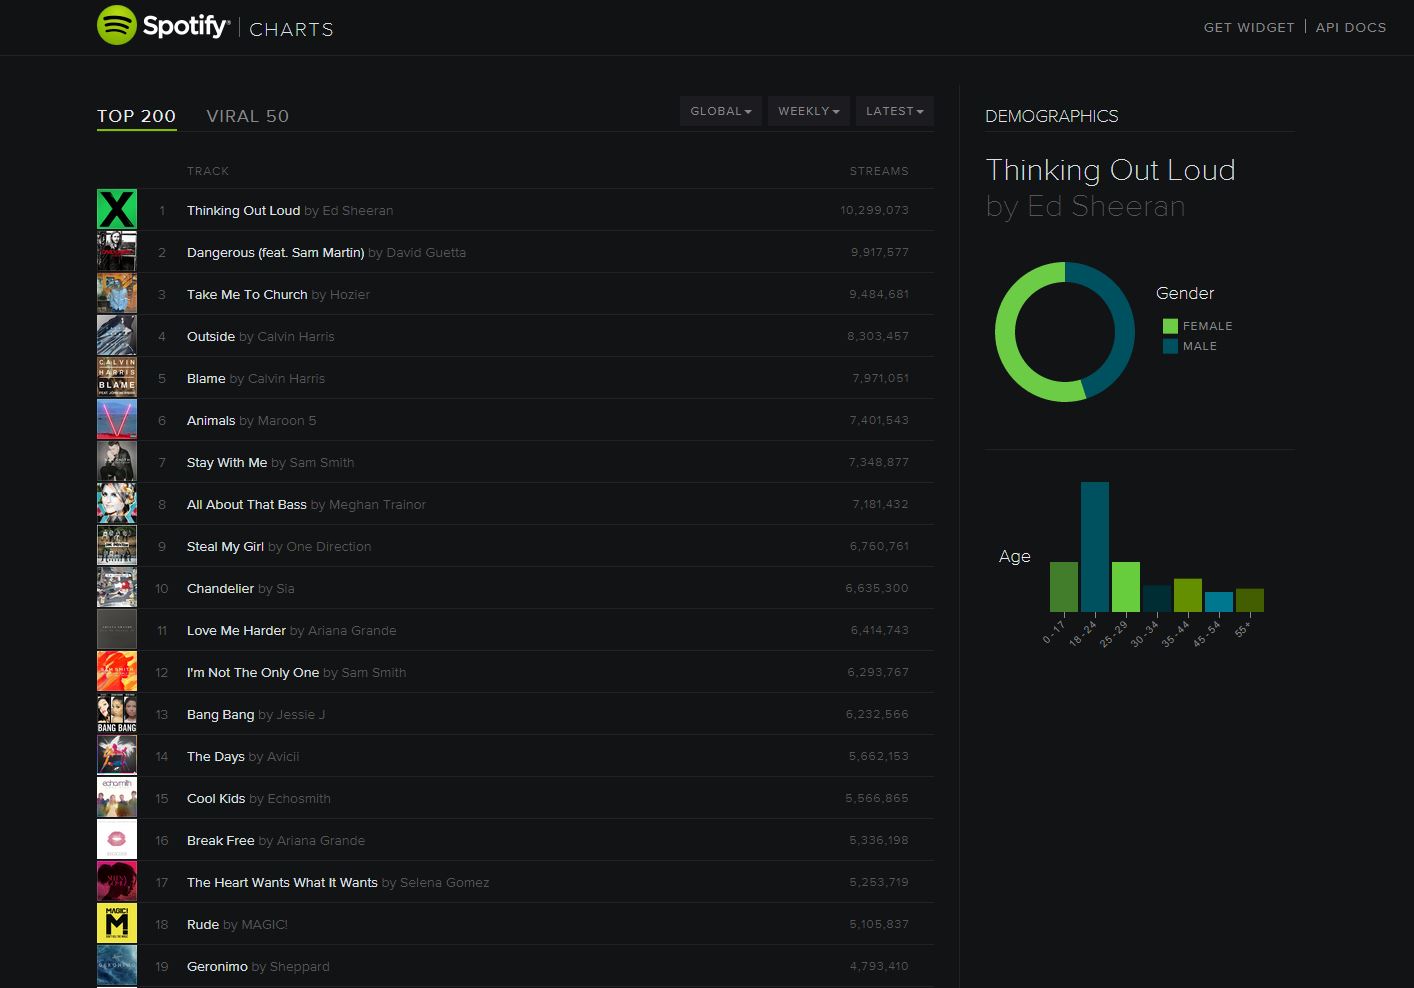 Want Some Awesome Insight into What People Are Listening To? Check